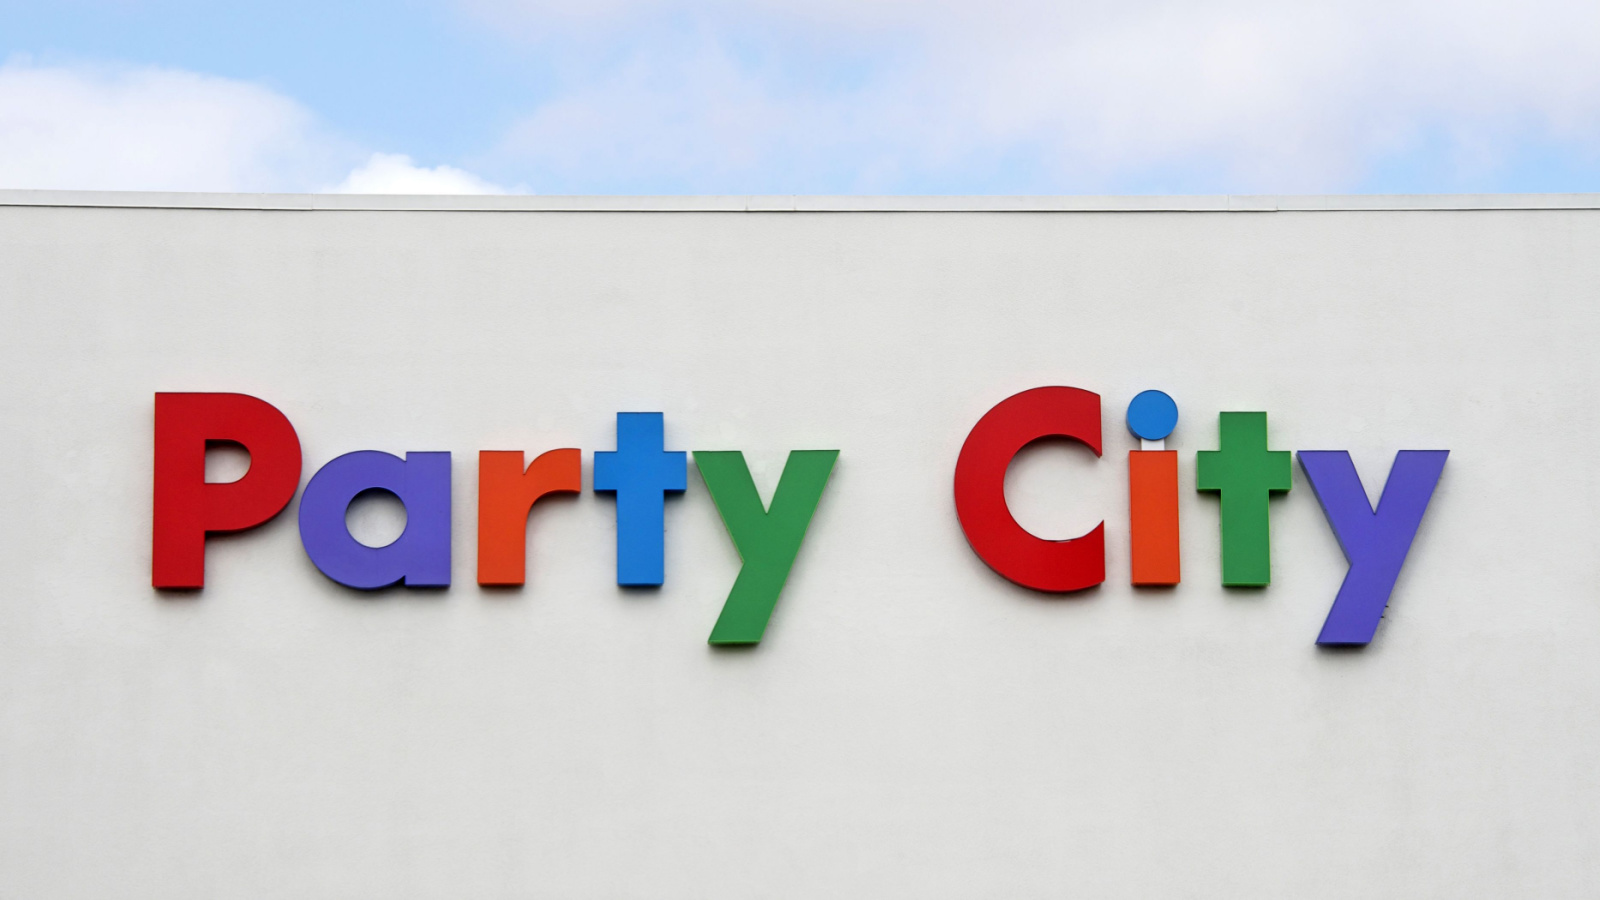 Party City (PRTY) sign over storefront with clouds and blue sky in background